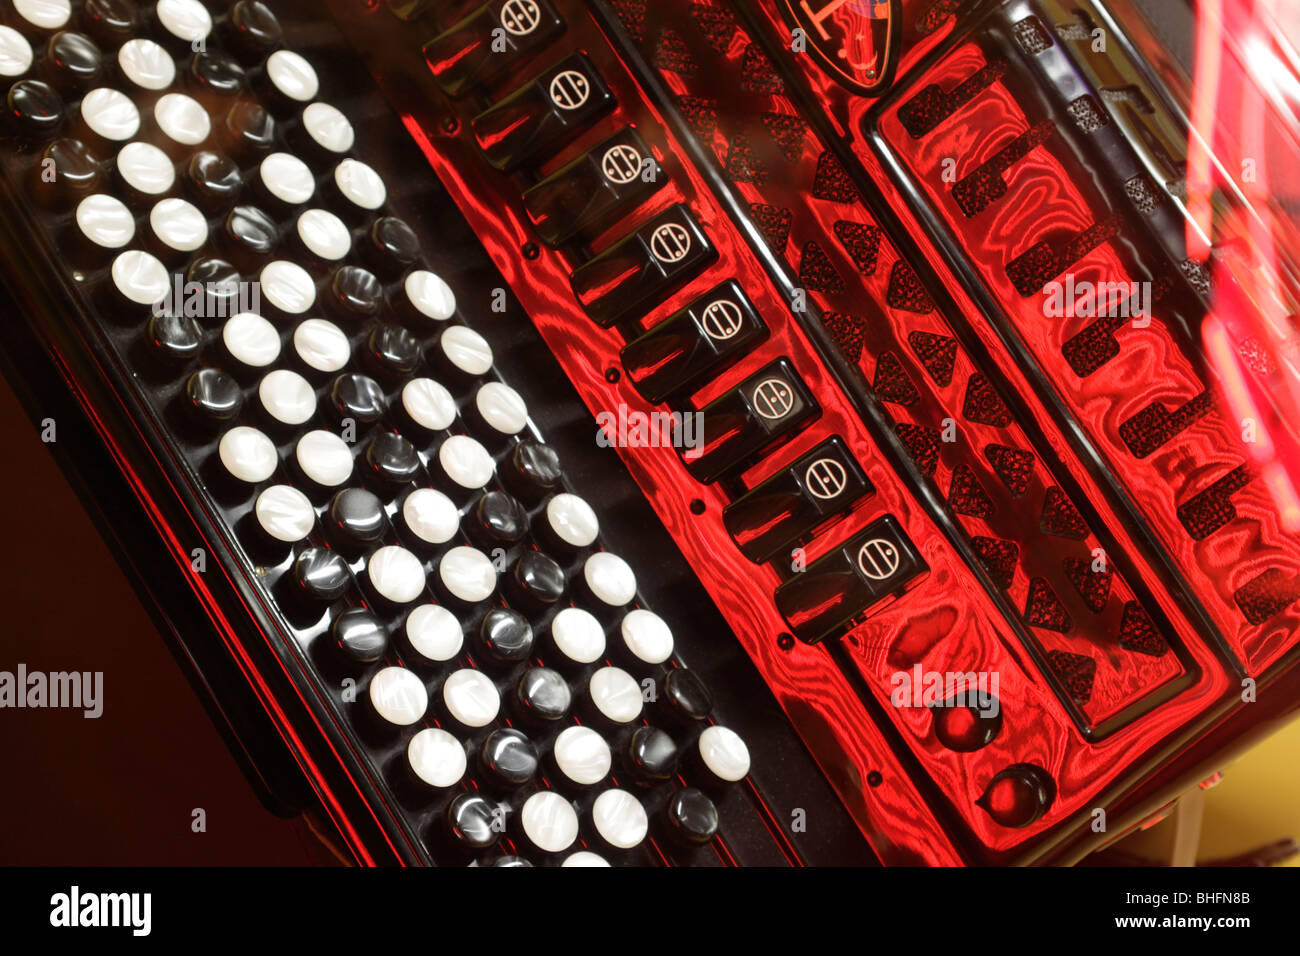 Accordion reflecting red light Stock Photo